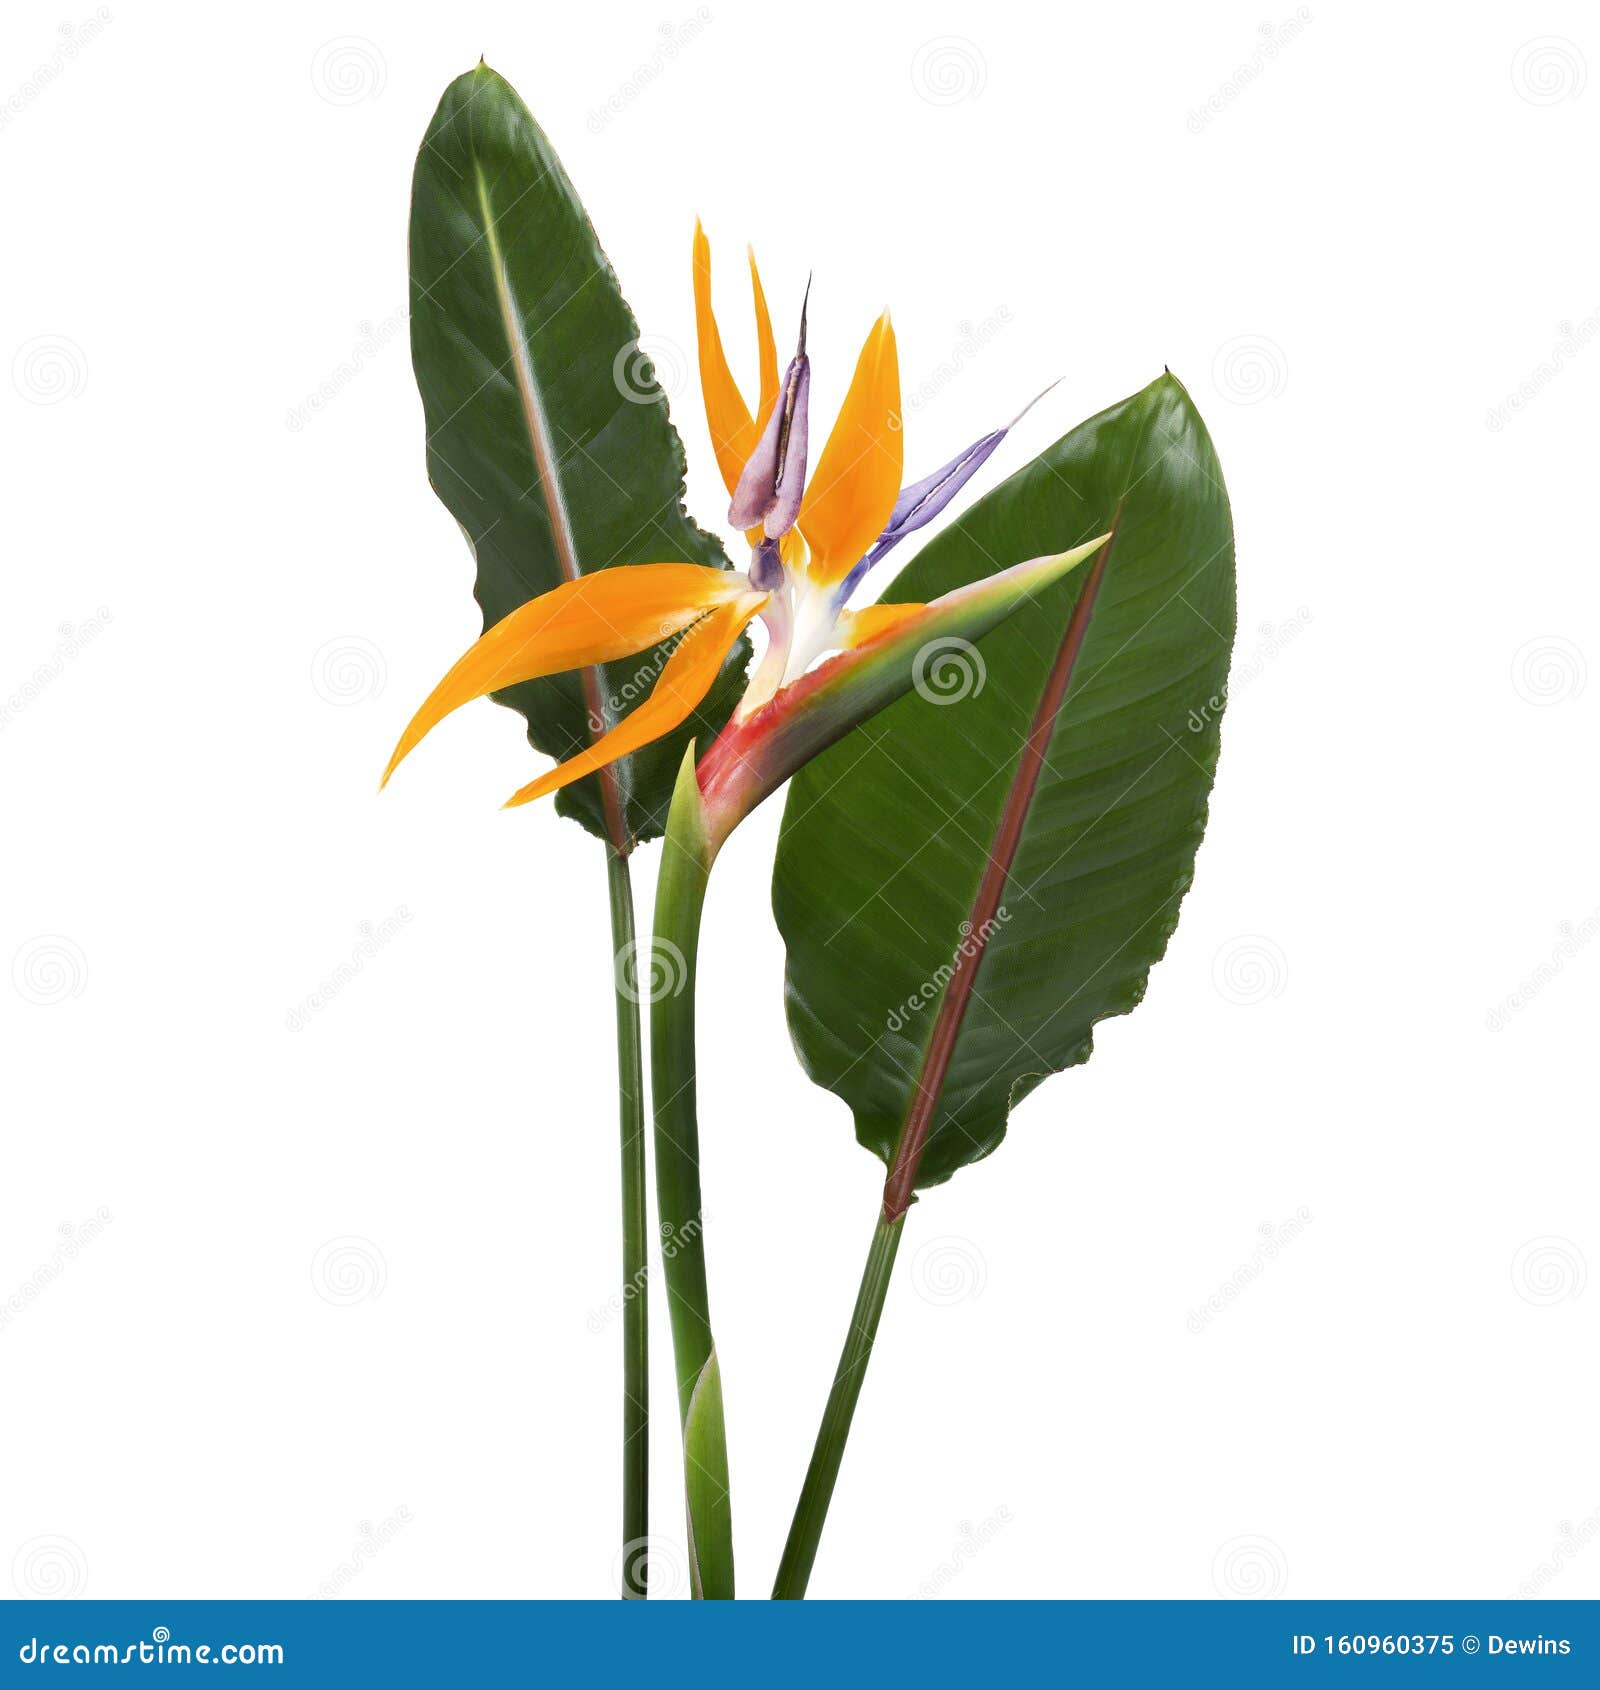 strelitzia reginae flower with leaves, bird of paradise flower, tropical flower  on white background, with clipping path